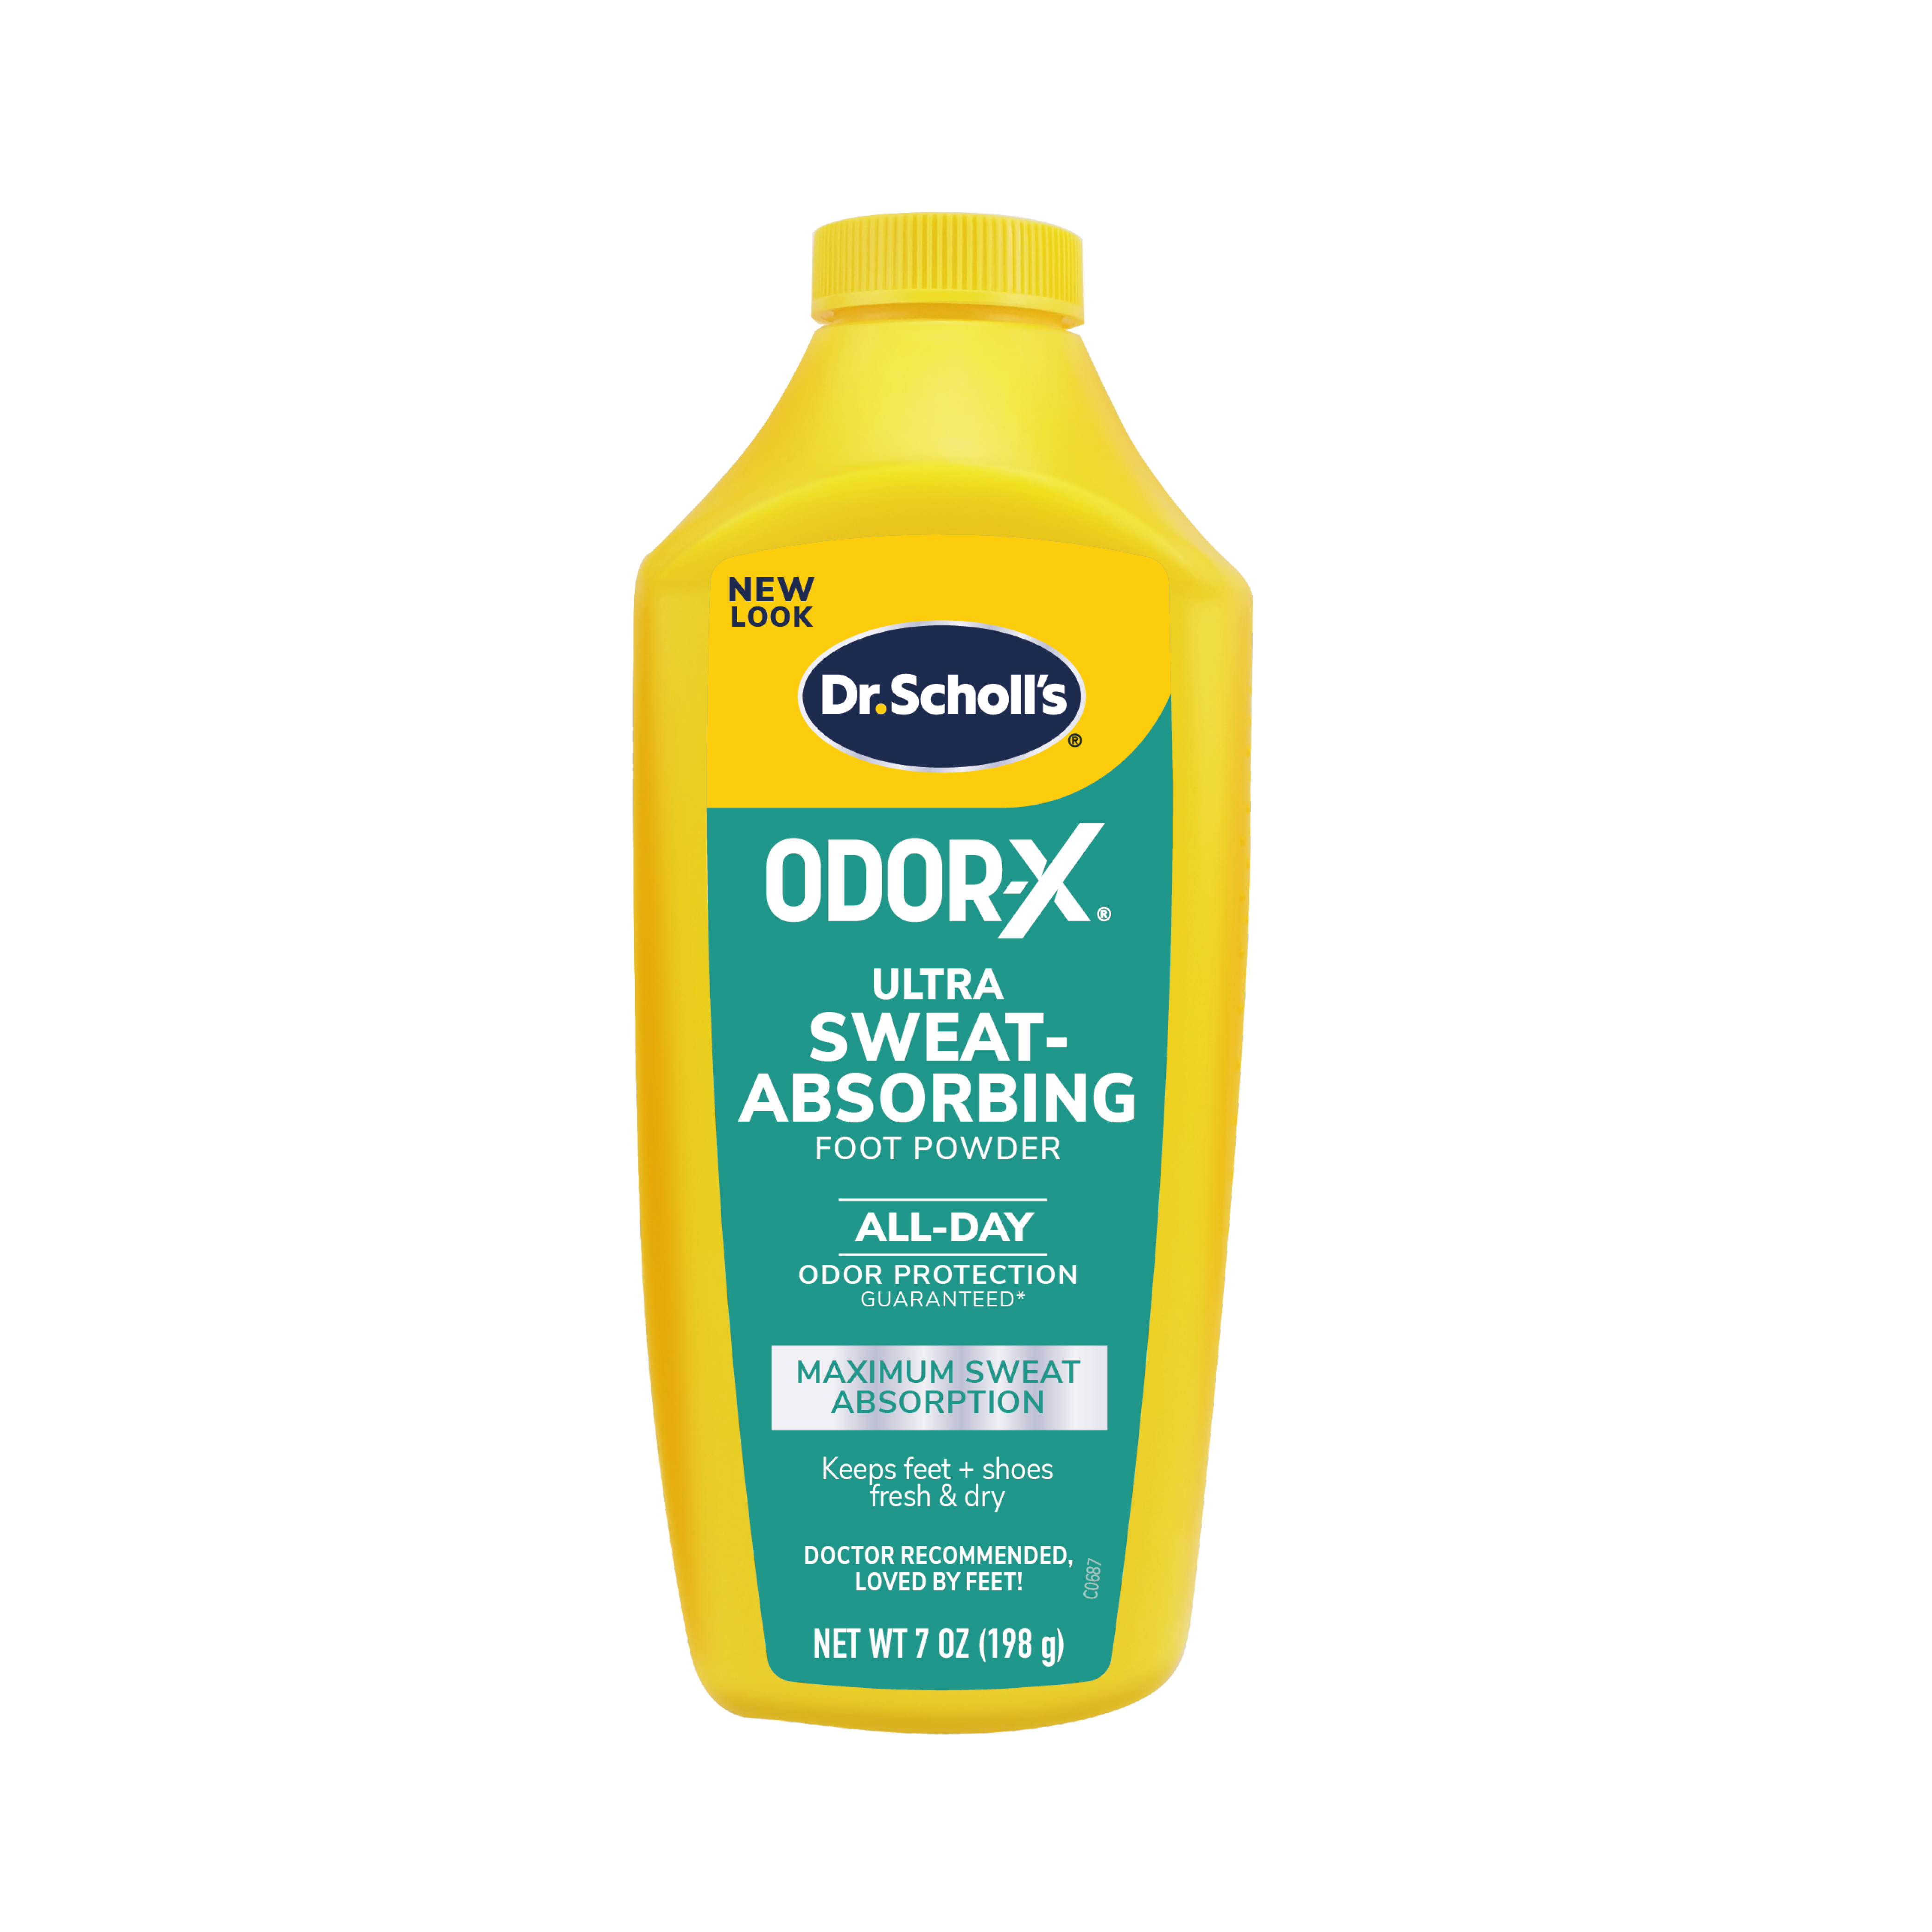 Dr. Scholl’s® Odor-X® Ultra Sweat-Absorbing Foot Powder (7 oz) for Maximum Sweat Absorption - image 1 of 10